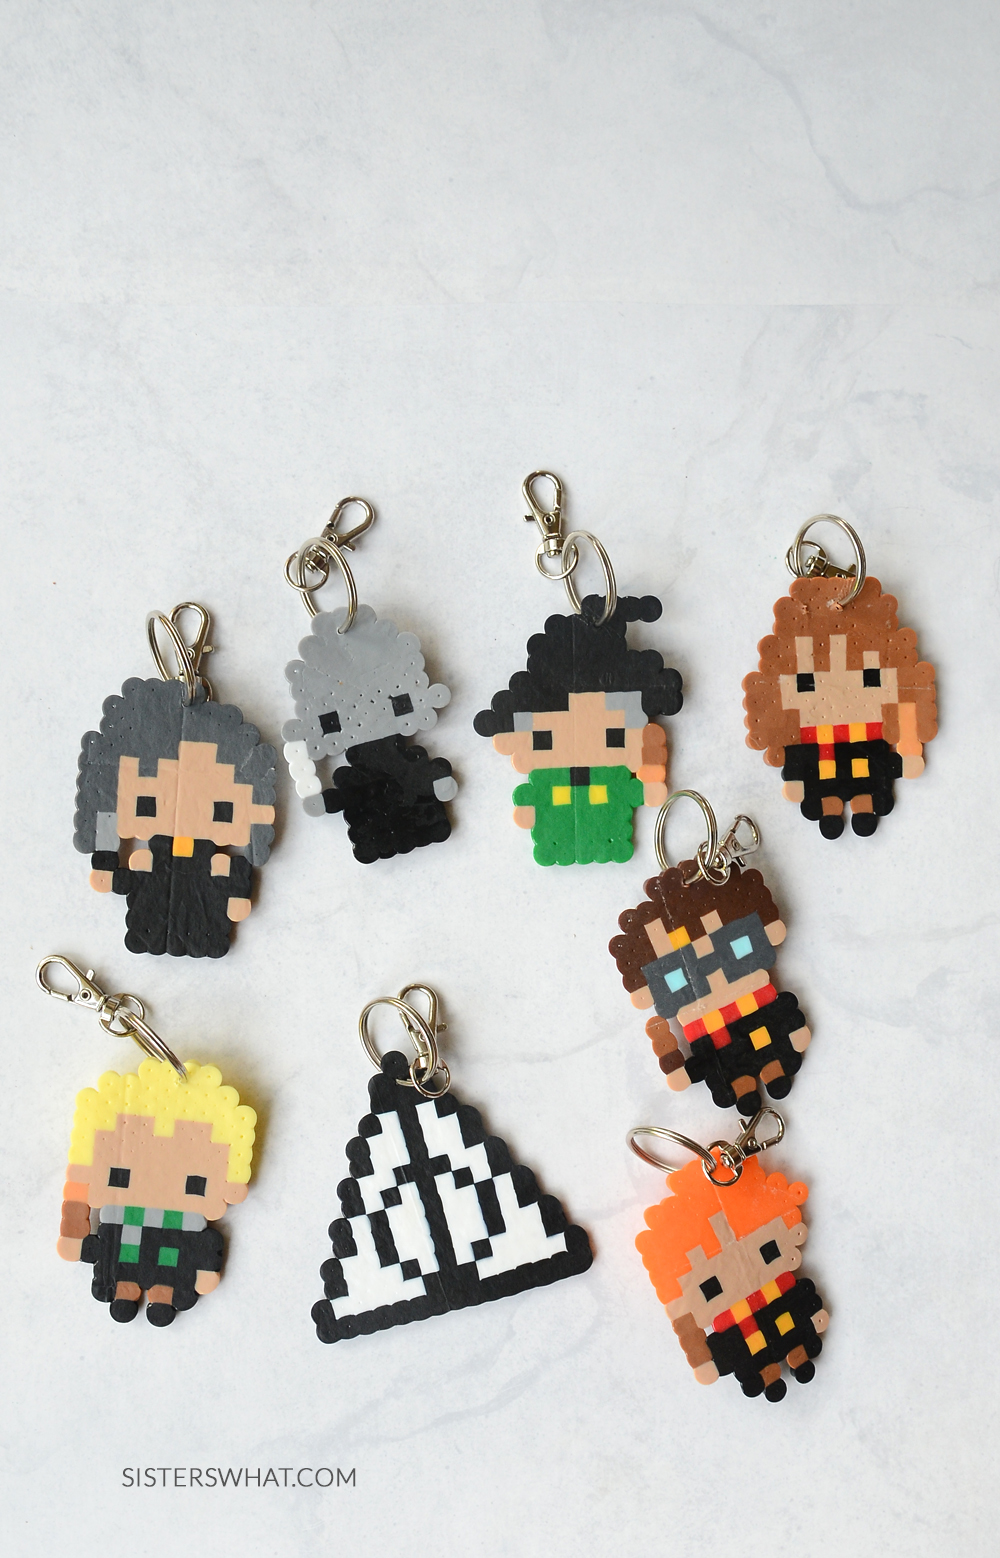 Harry Potter Perler Bead Patterns and Keychains- Book Review